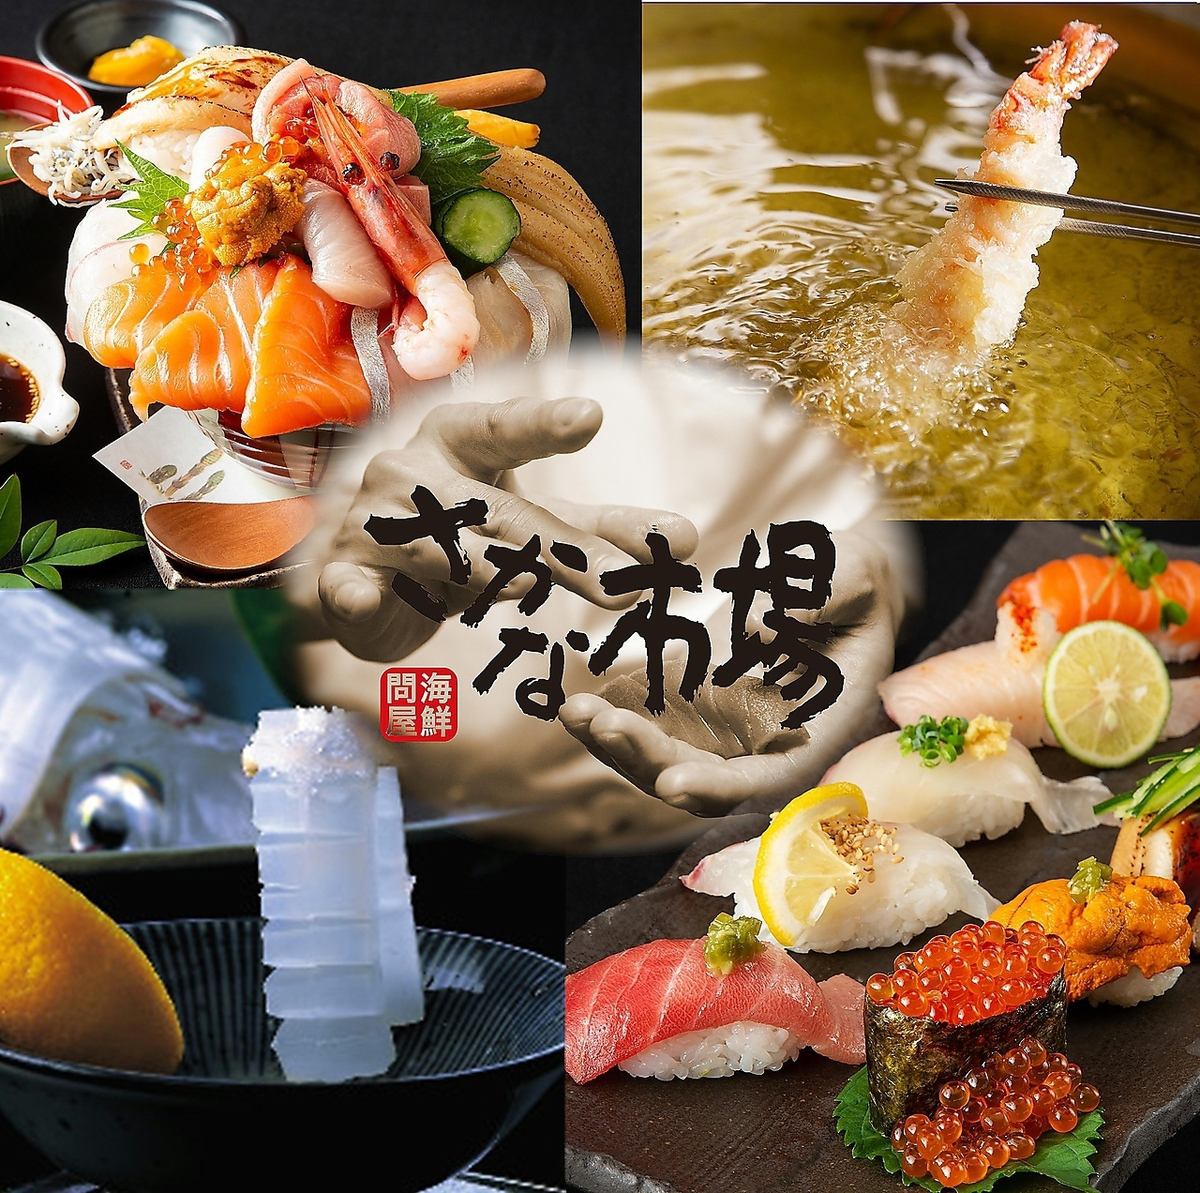 We are proud of the fresh fresh fish sent directly from the market ♪ Sashimi, grilled, fried, steamed ... anything is OK